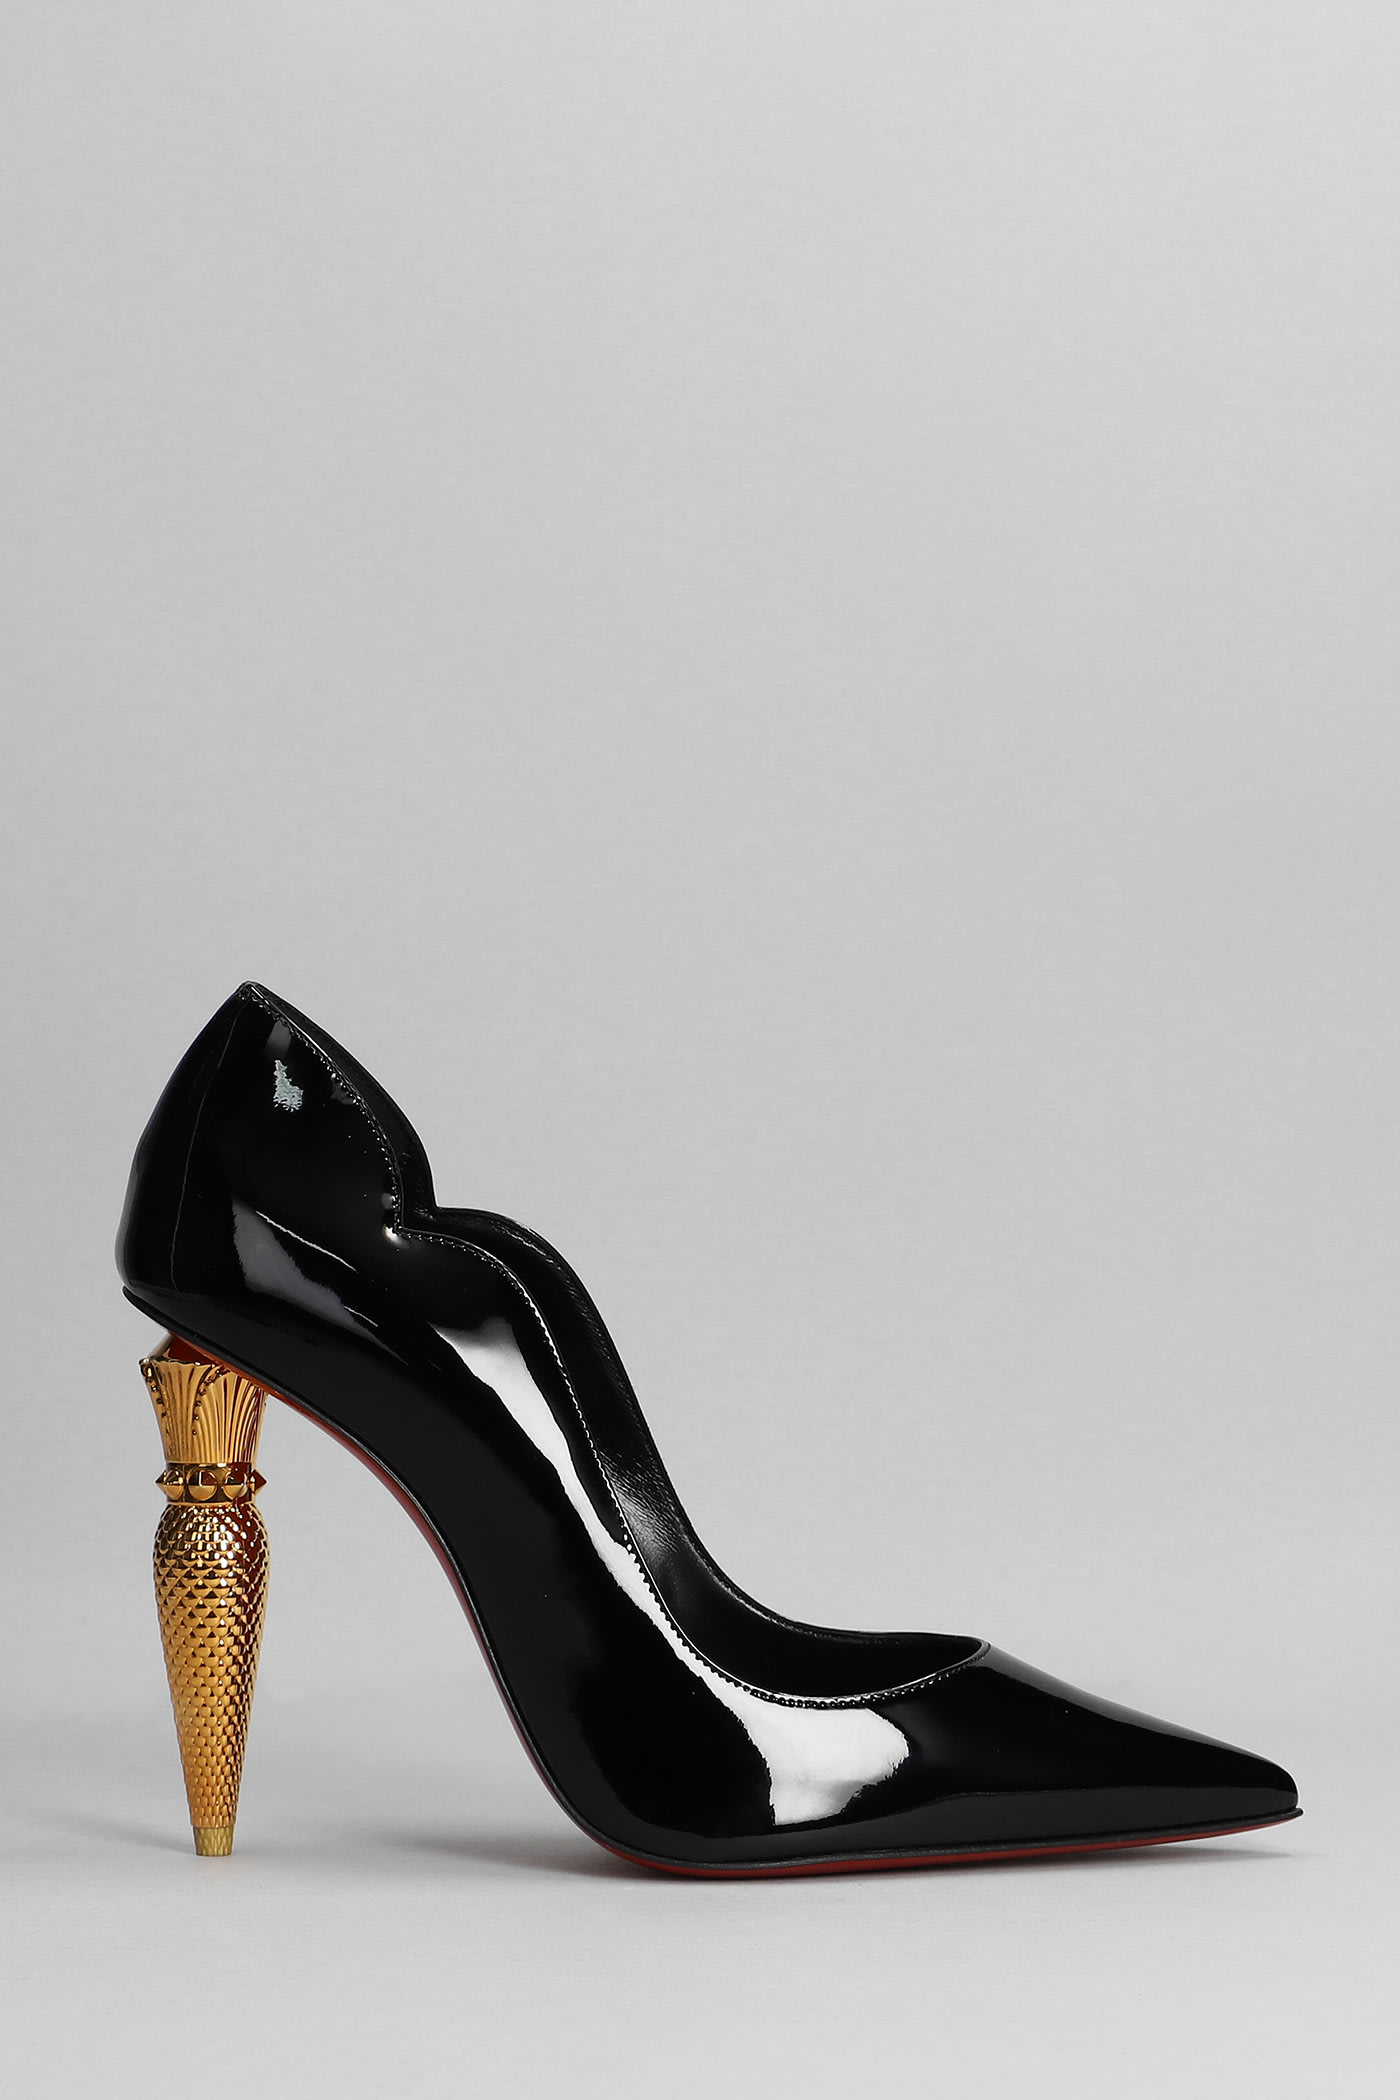 Christian Louboutin Lipchick 100 Pumps In Black Patent Leather